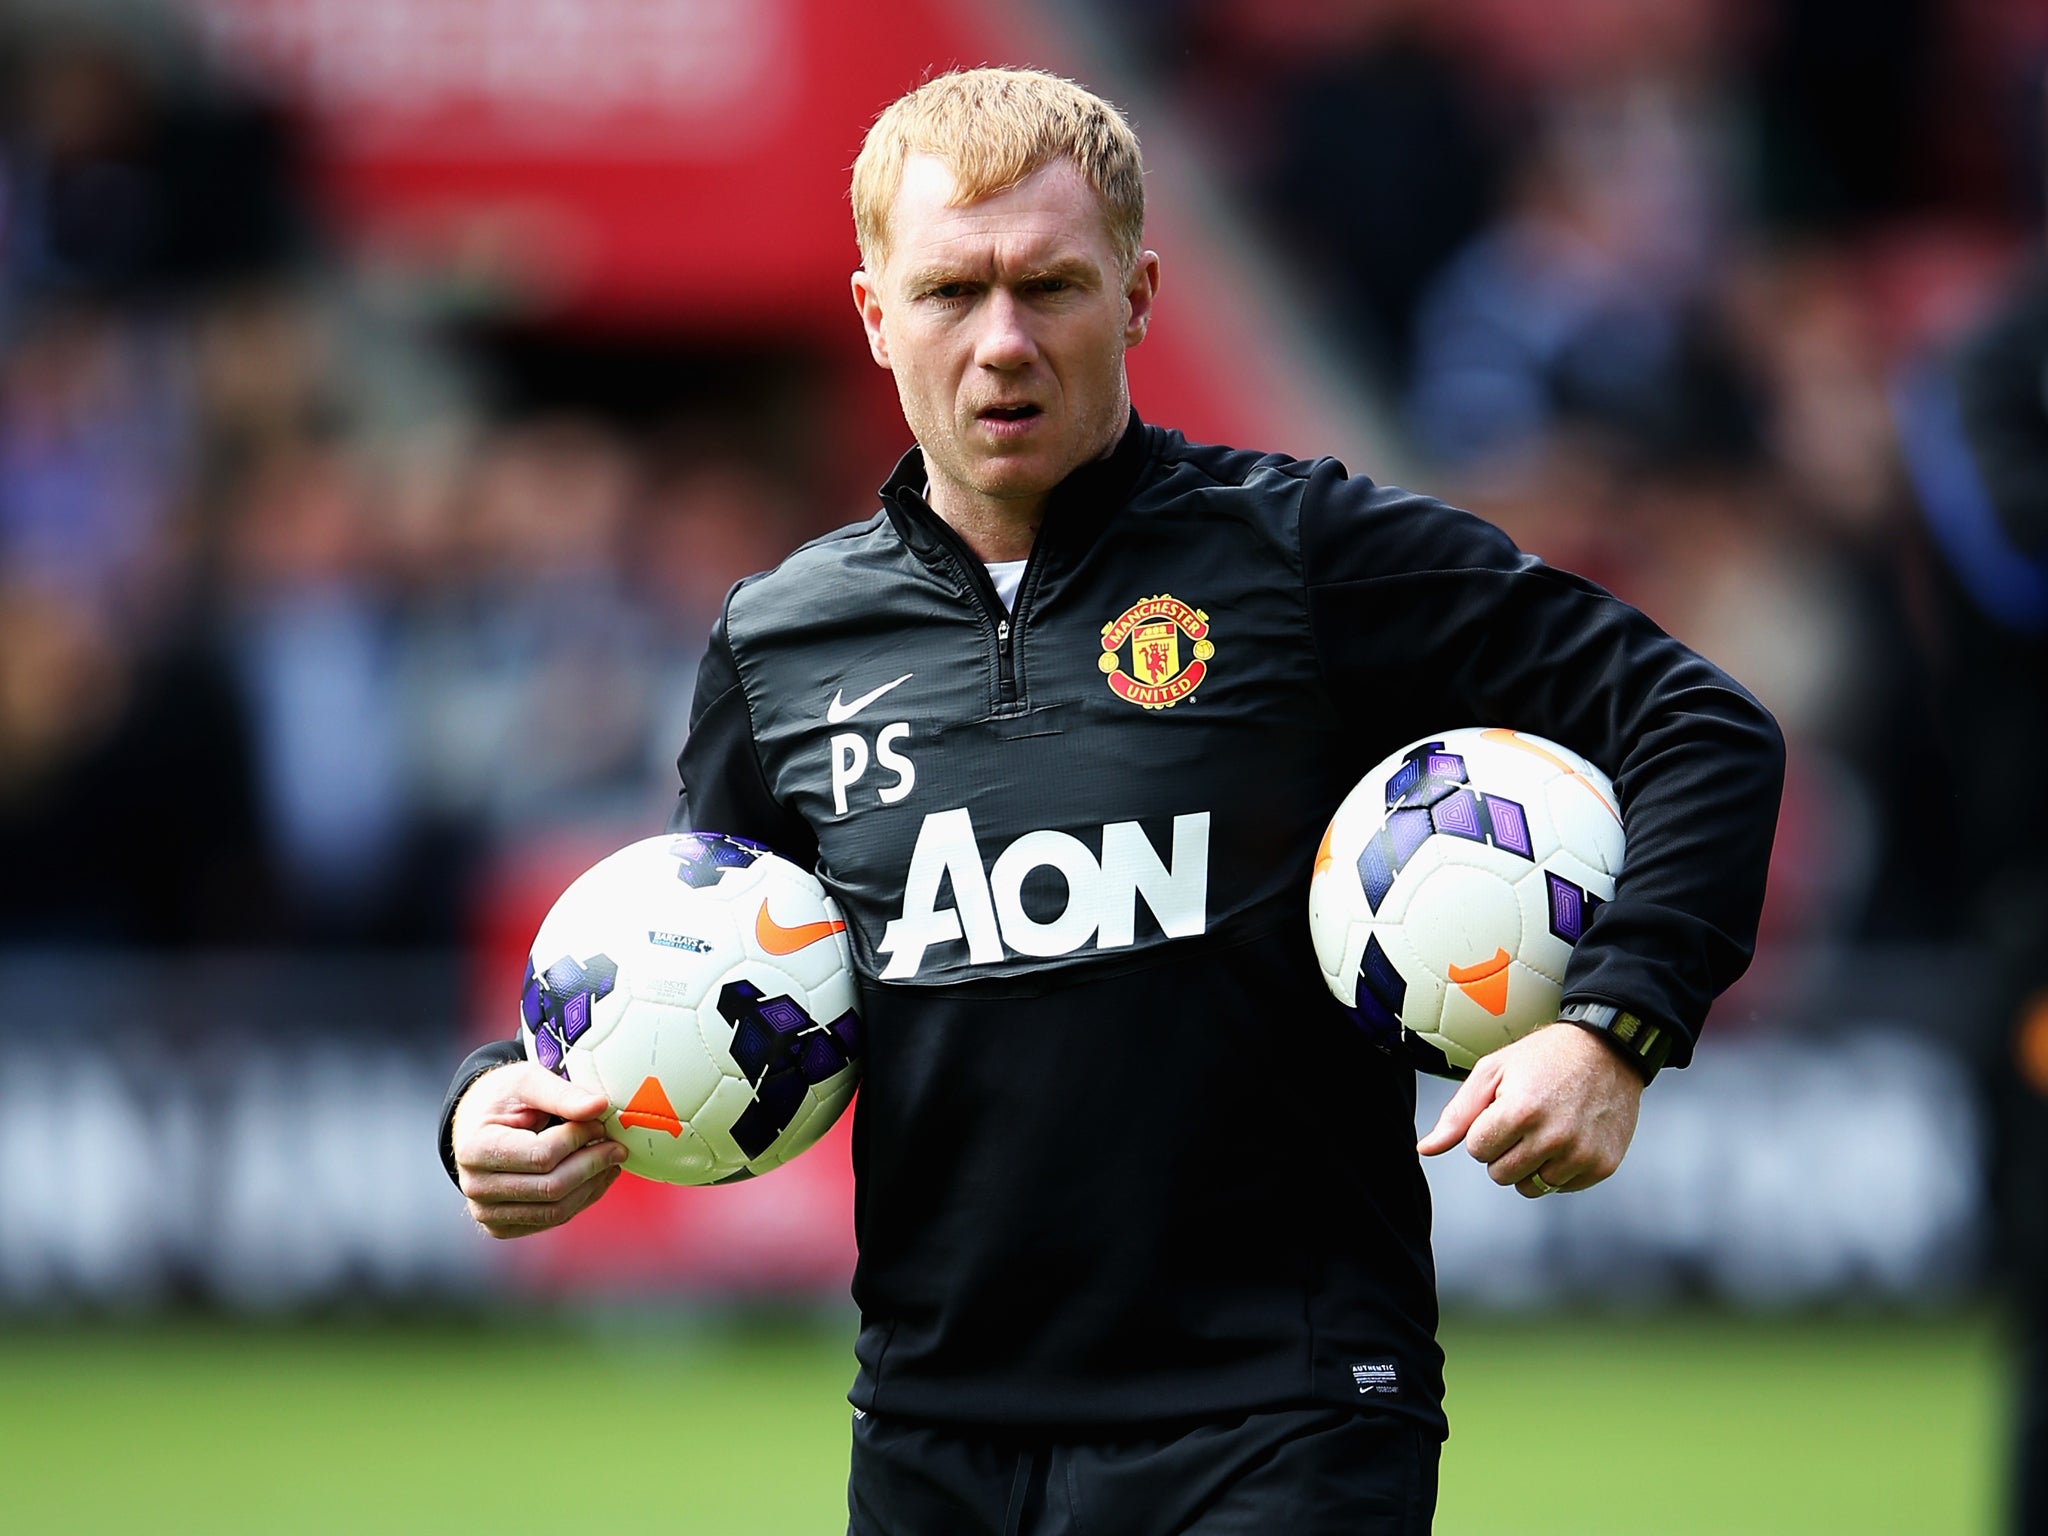 Paul Scholes looks set to leave Manchester United after he admitted he doesn't expect to be part of Louis van Gaal's coaching set-up